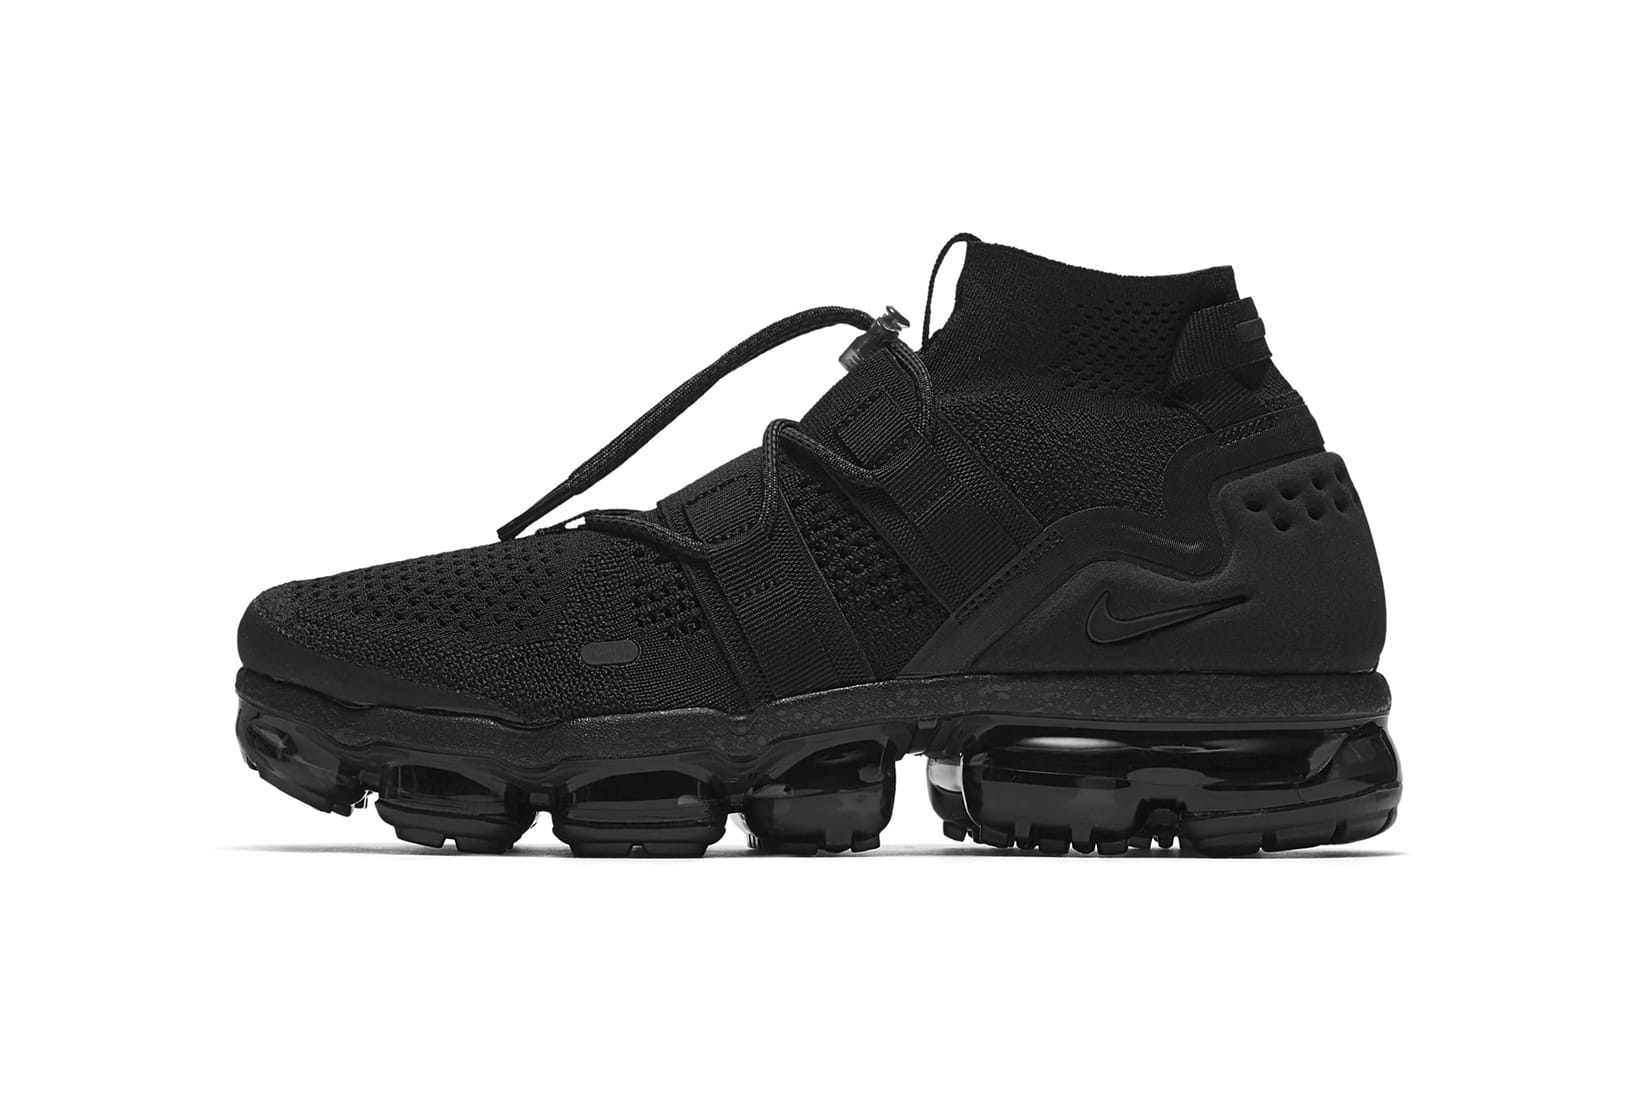 Nike Air Vapormax - Page 18 | HYPEBEAST